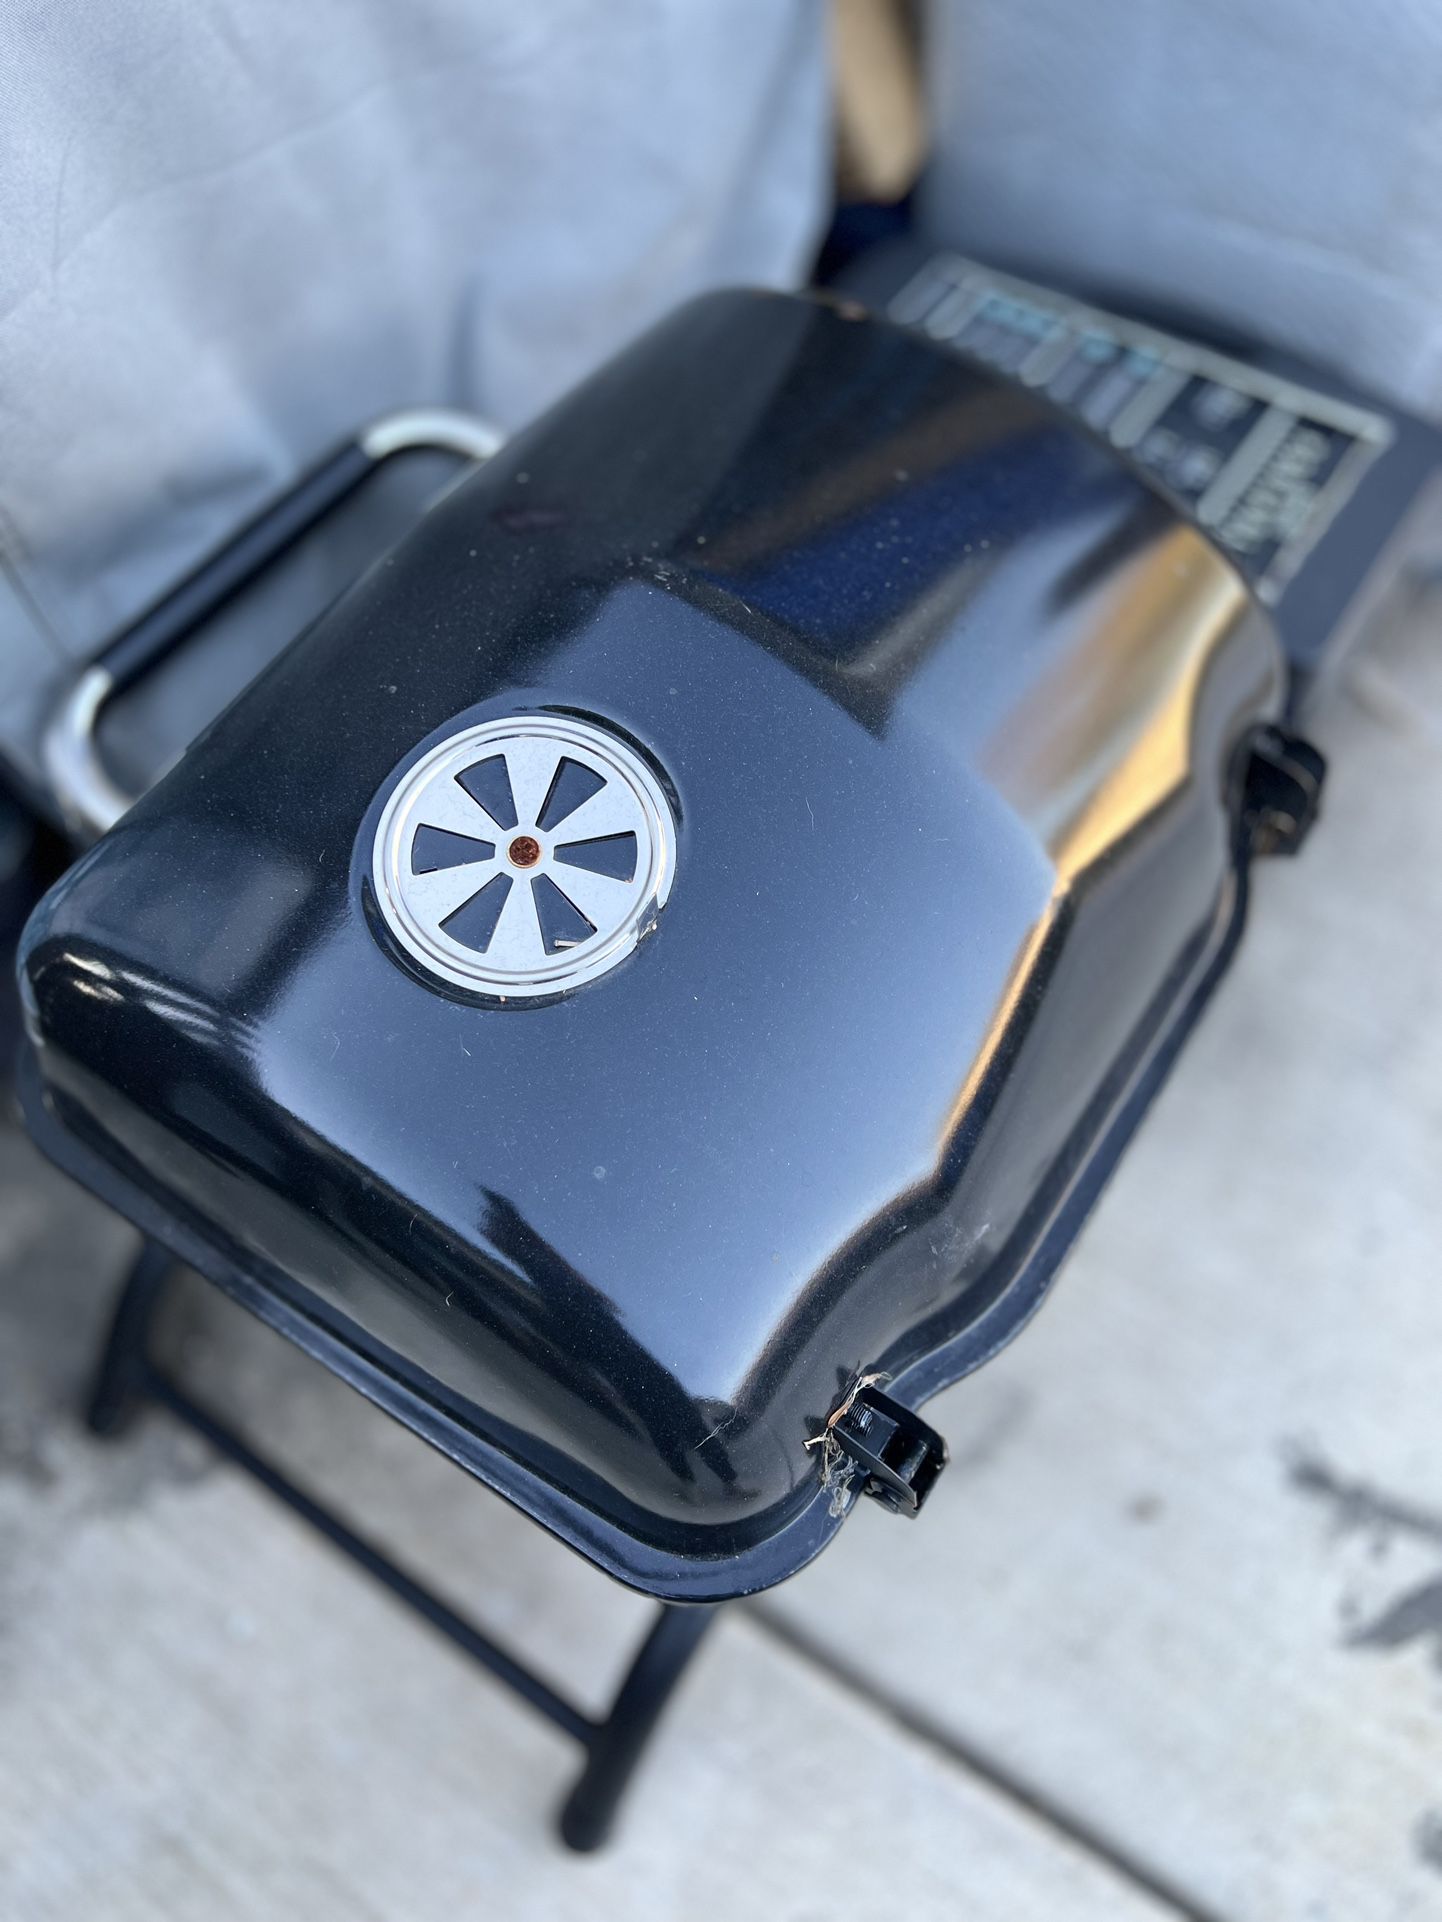 Portable BBQ Grill - Light Easy To Carry $30